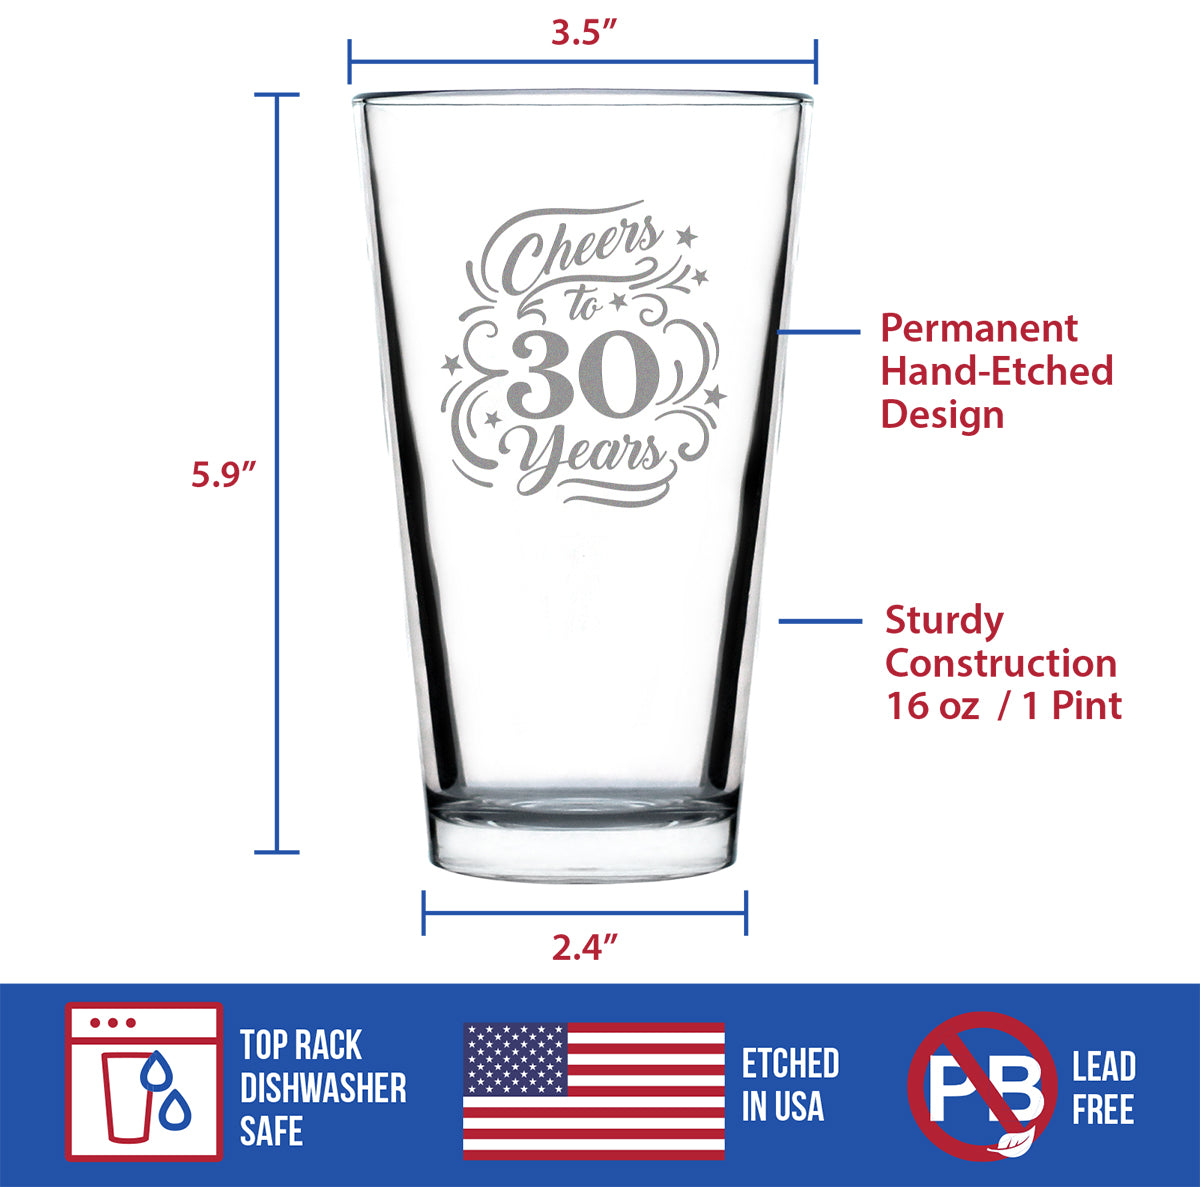 Cheers to 30 Years - Pint Glass for Beer - Gifts for Women &amp; Men - 30th Anniversary Party Decor - 16 Oz Glasses